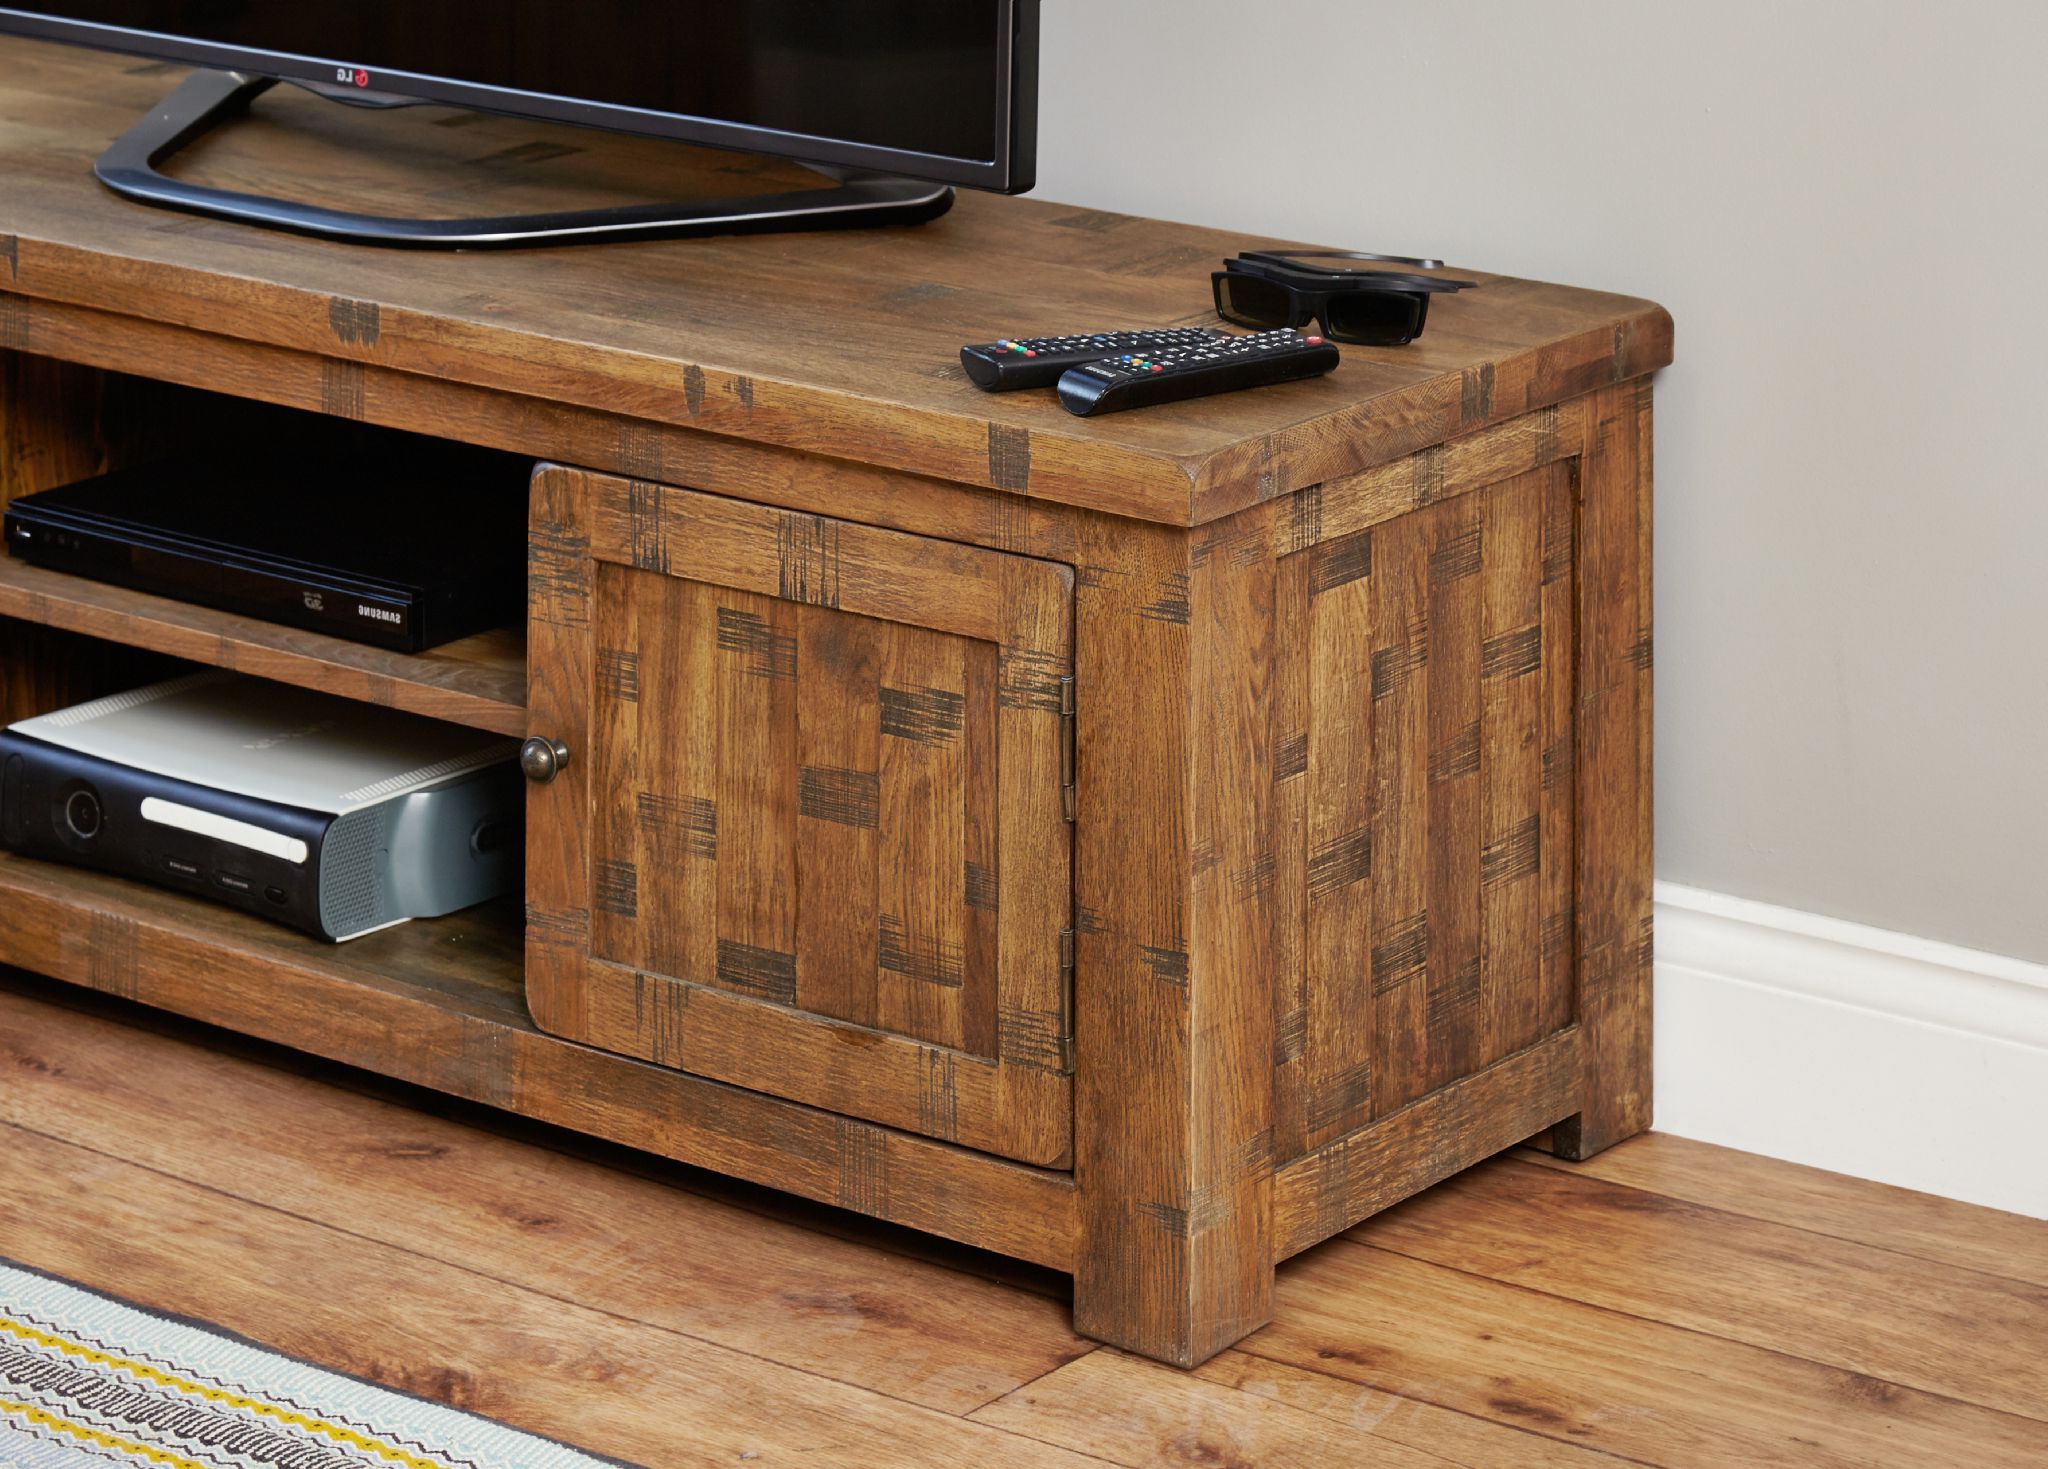 Antique Tv Stand For Sale Rustic Wood Entertainment Center Console Within Most Recently Released Rustic Tv Stands For Sale (View 4 of 20)